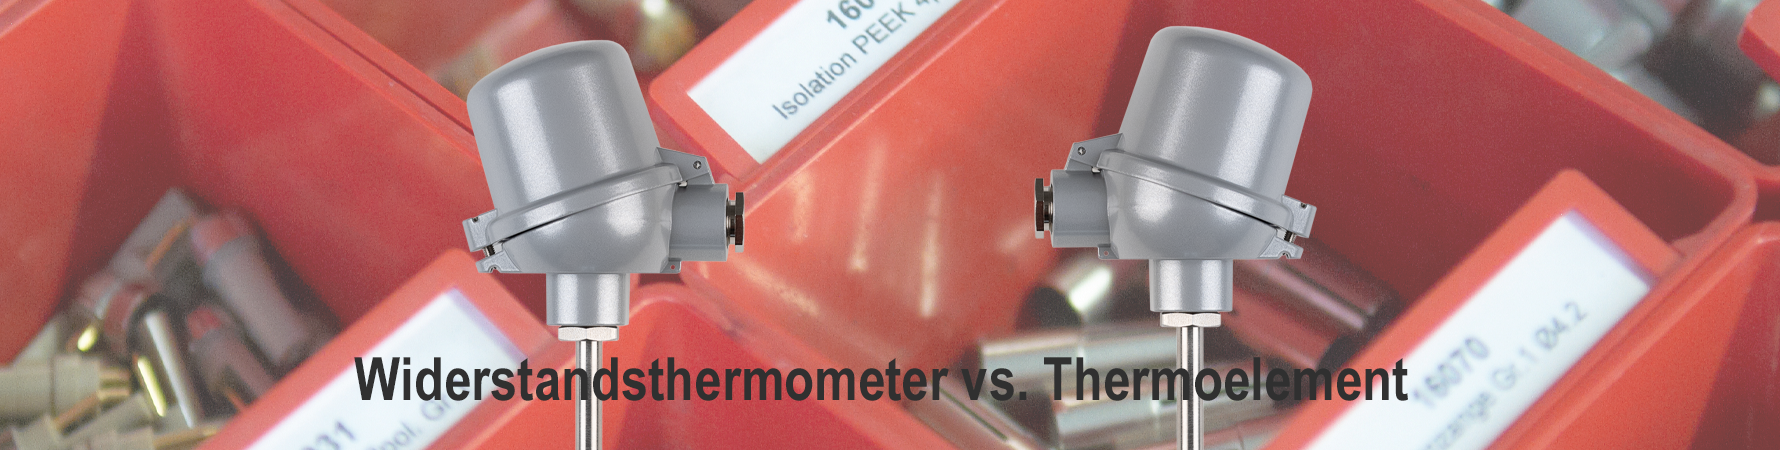 Widerstandsthermometer vs. Thermoelement